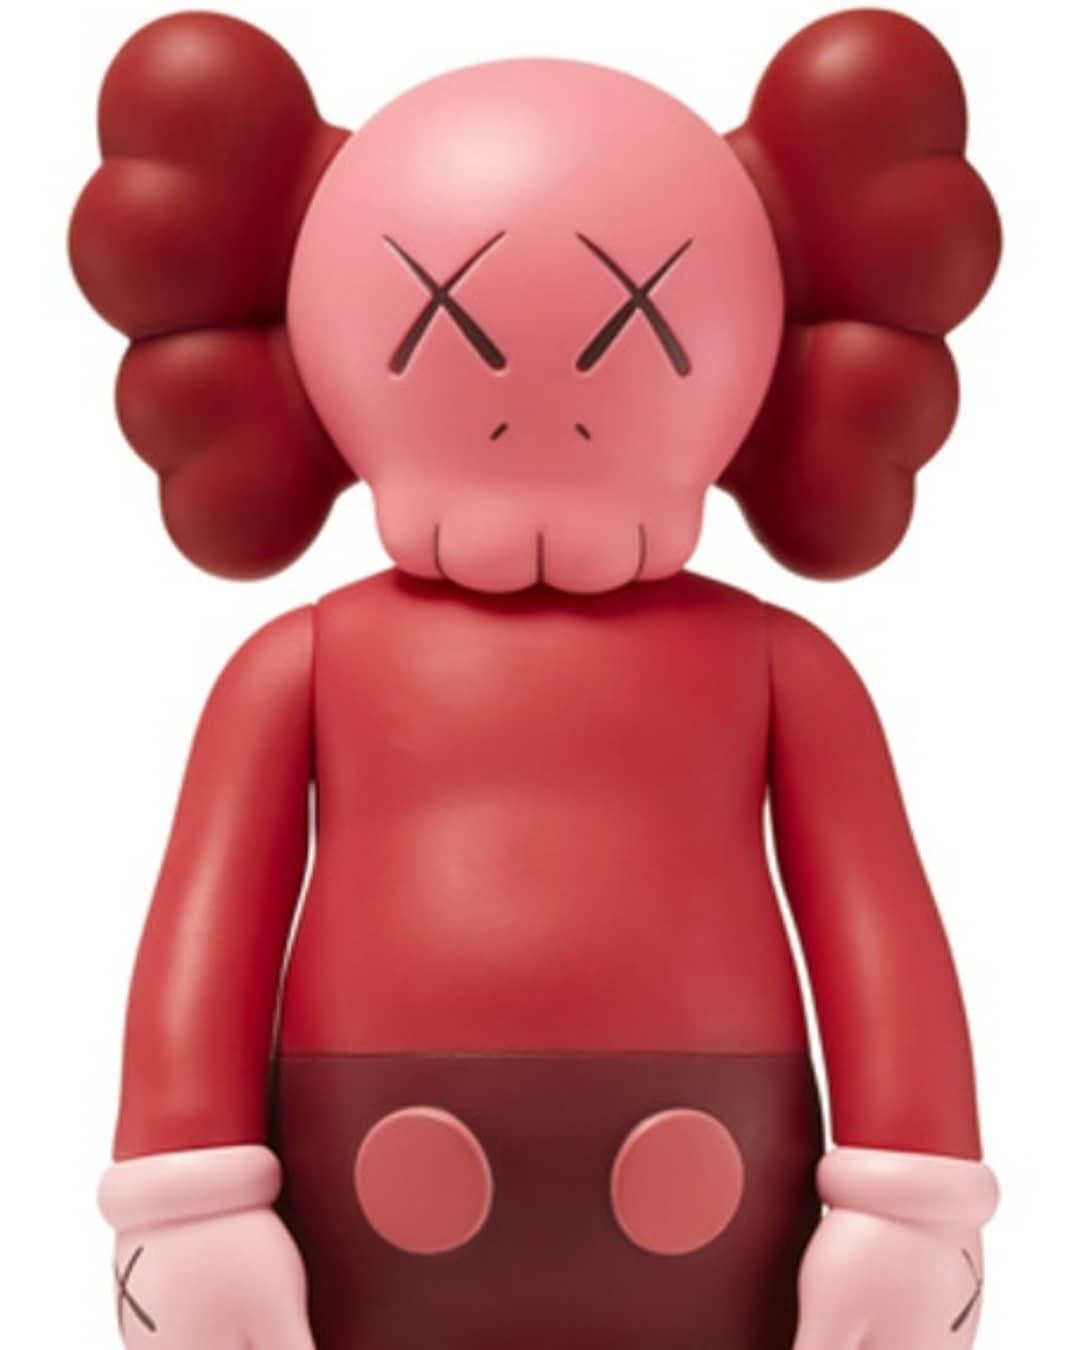 KAWS Companions, set of 2, Blush, Full and Flayed (2016) For Sale 8